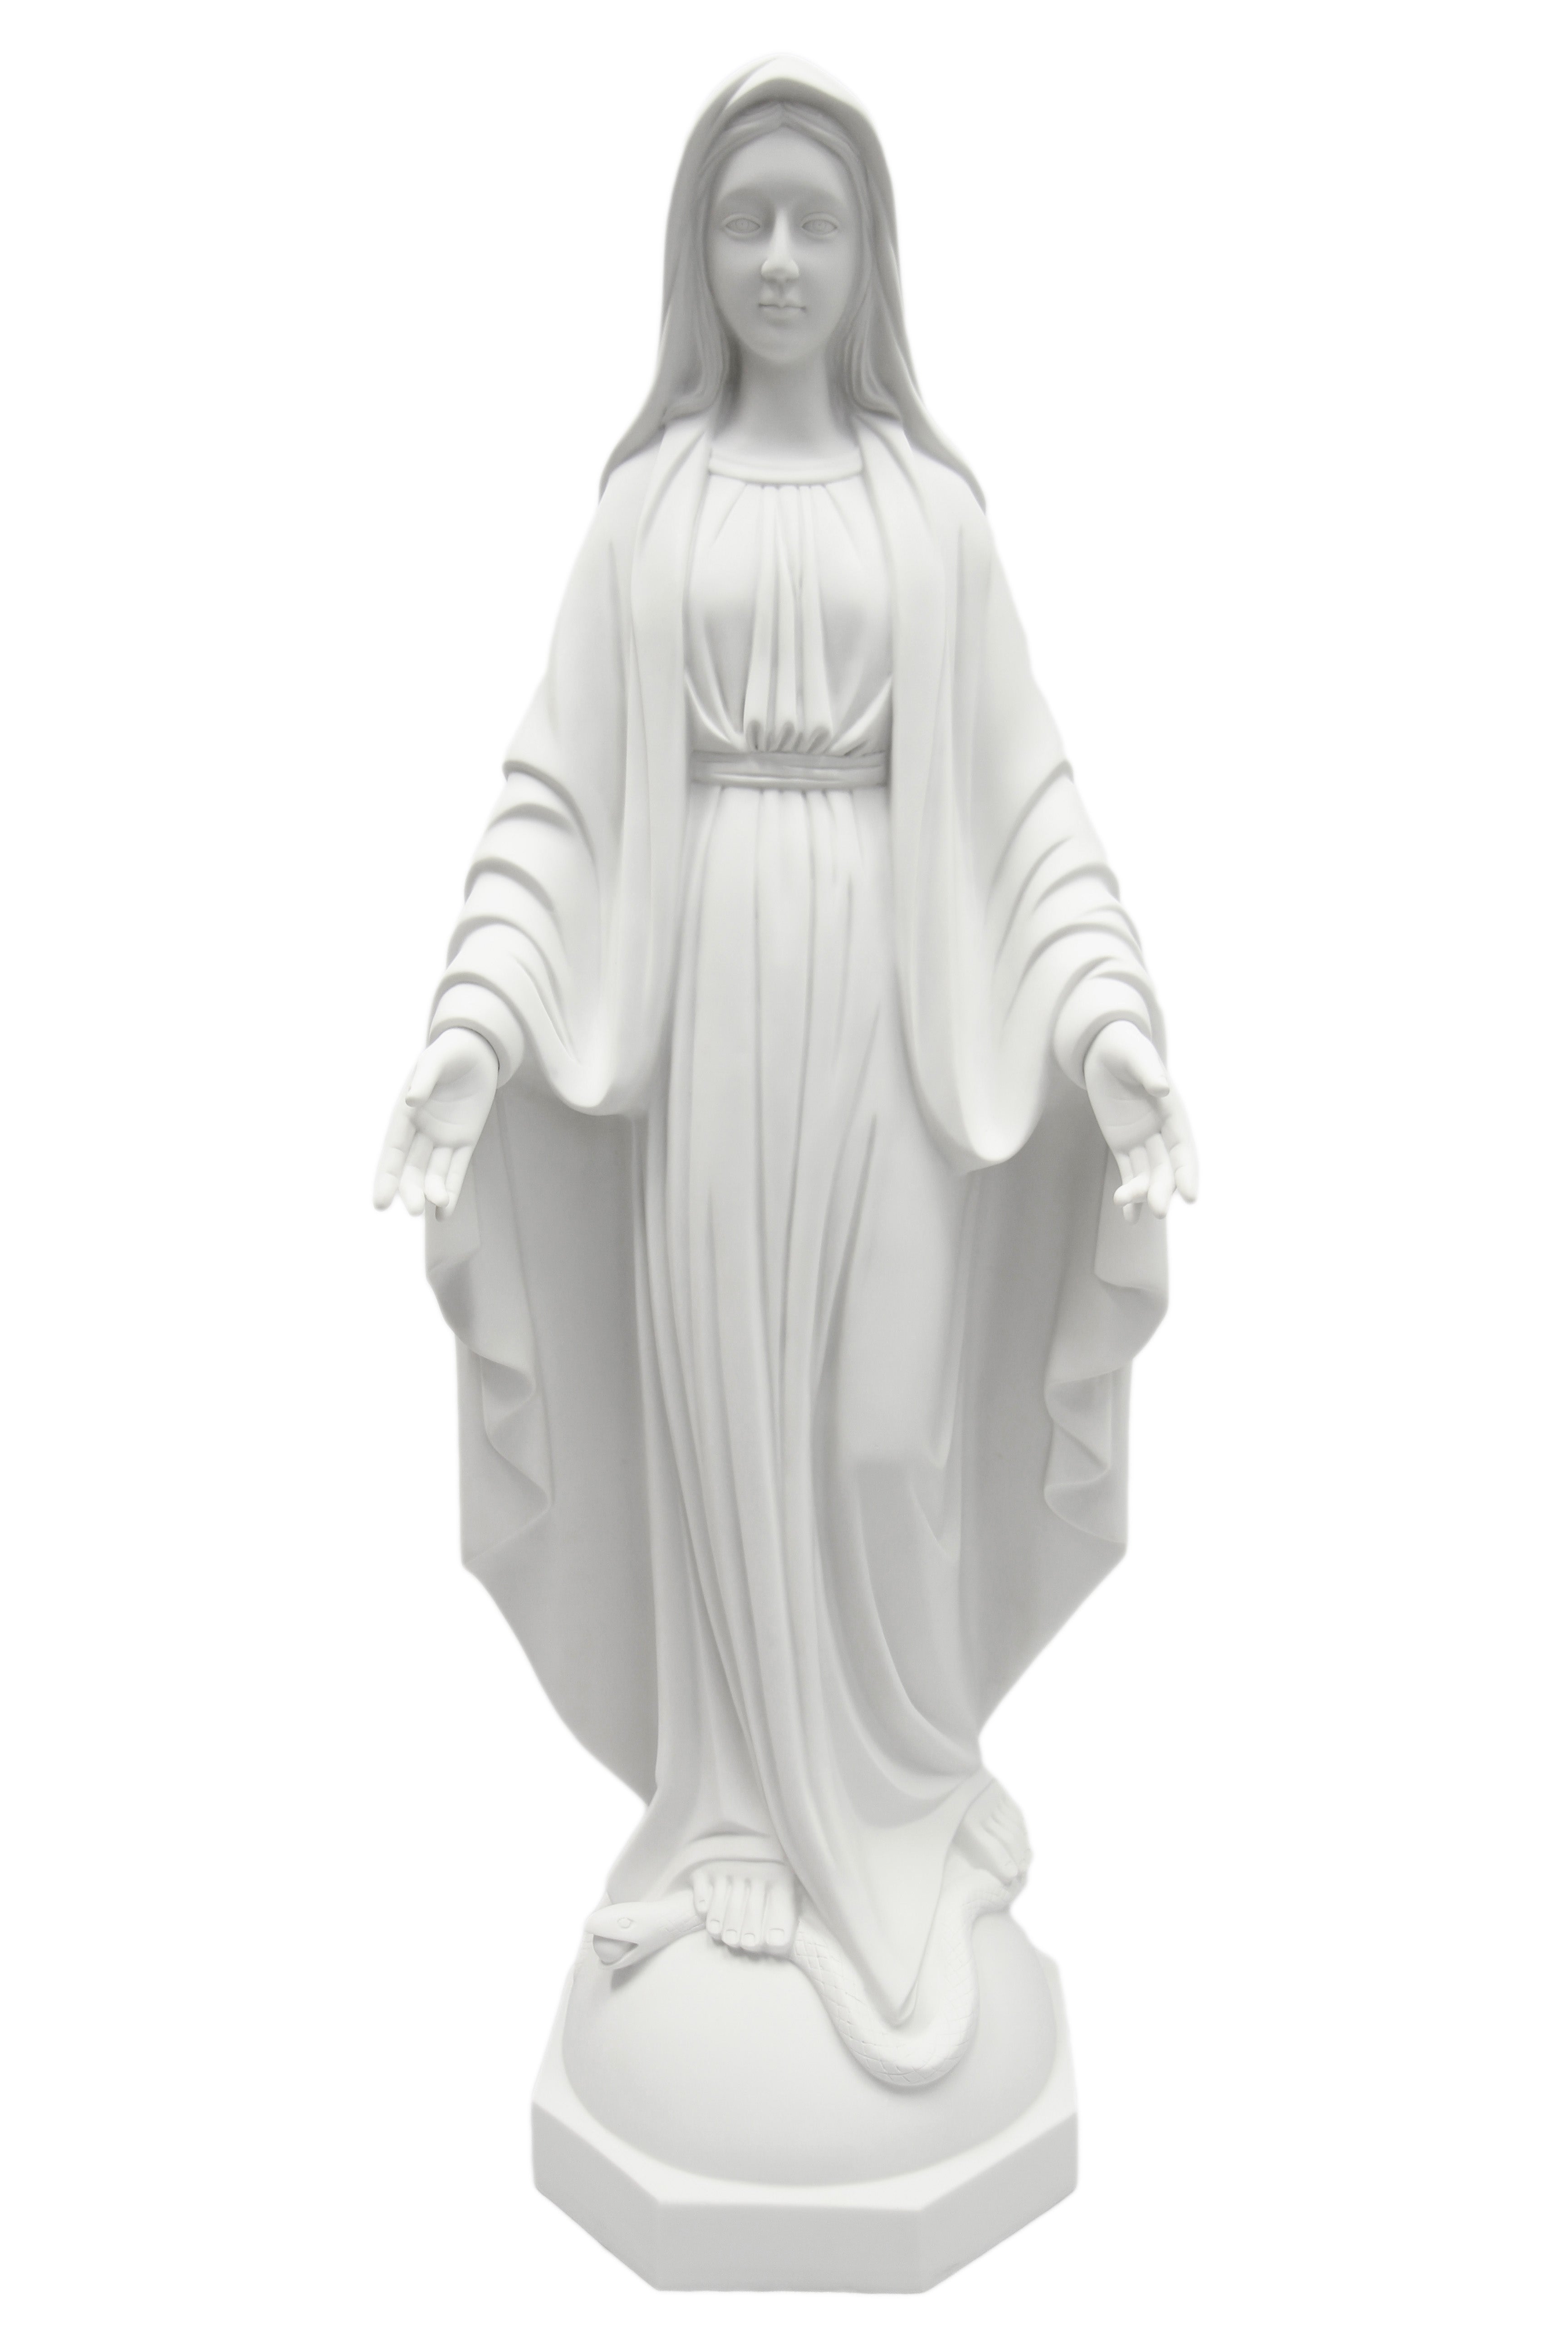 39" Our Lady of Grace Virgin Mary Catholic Statue Vittoria Collection Made in Italy